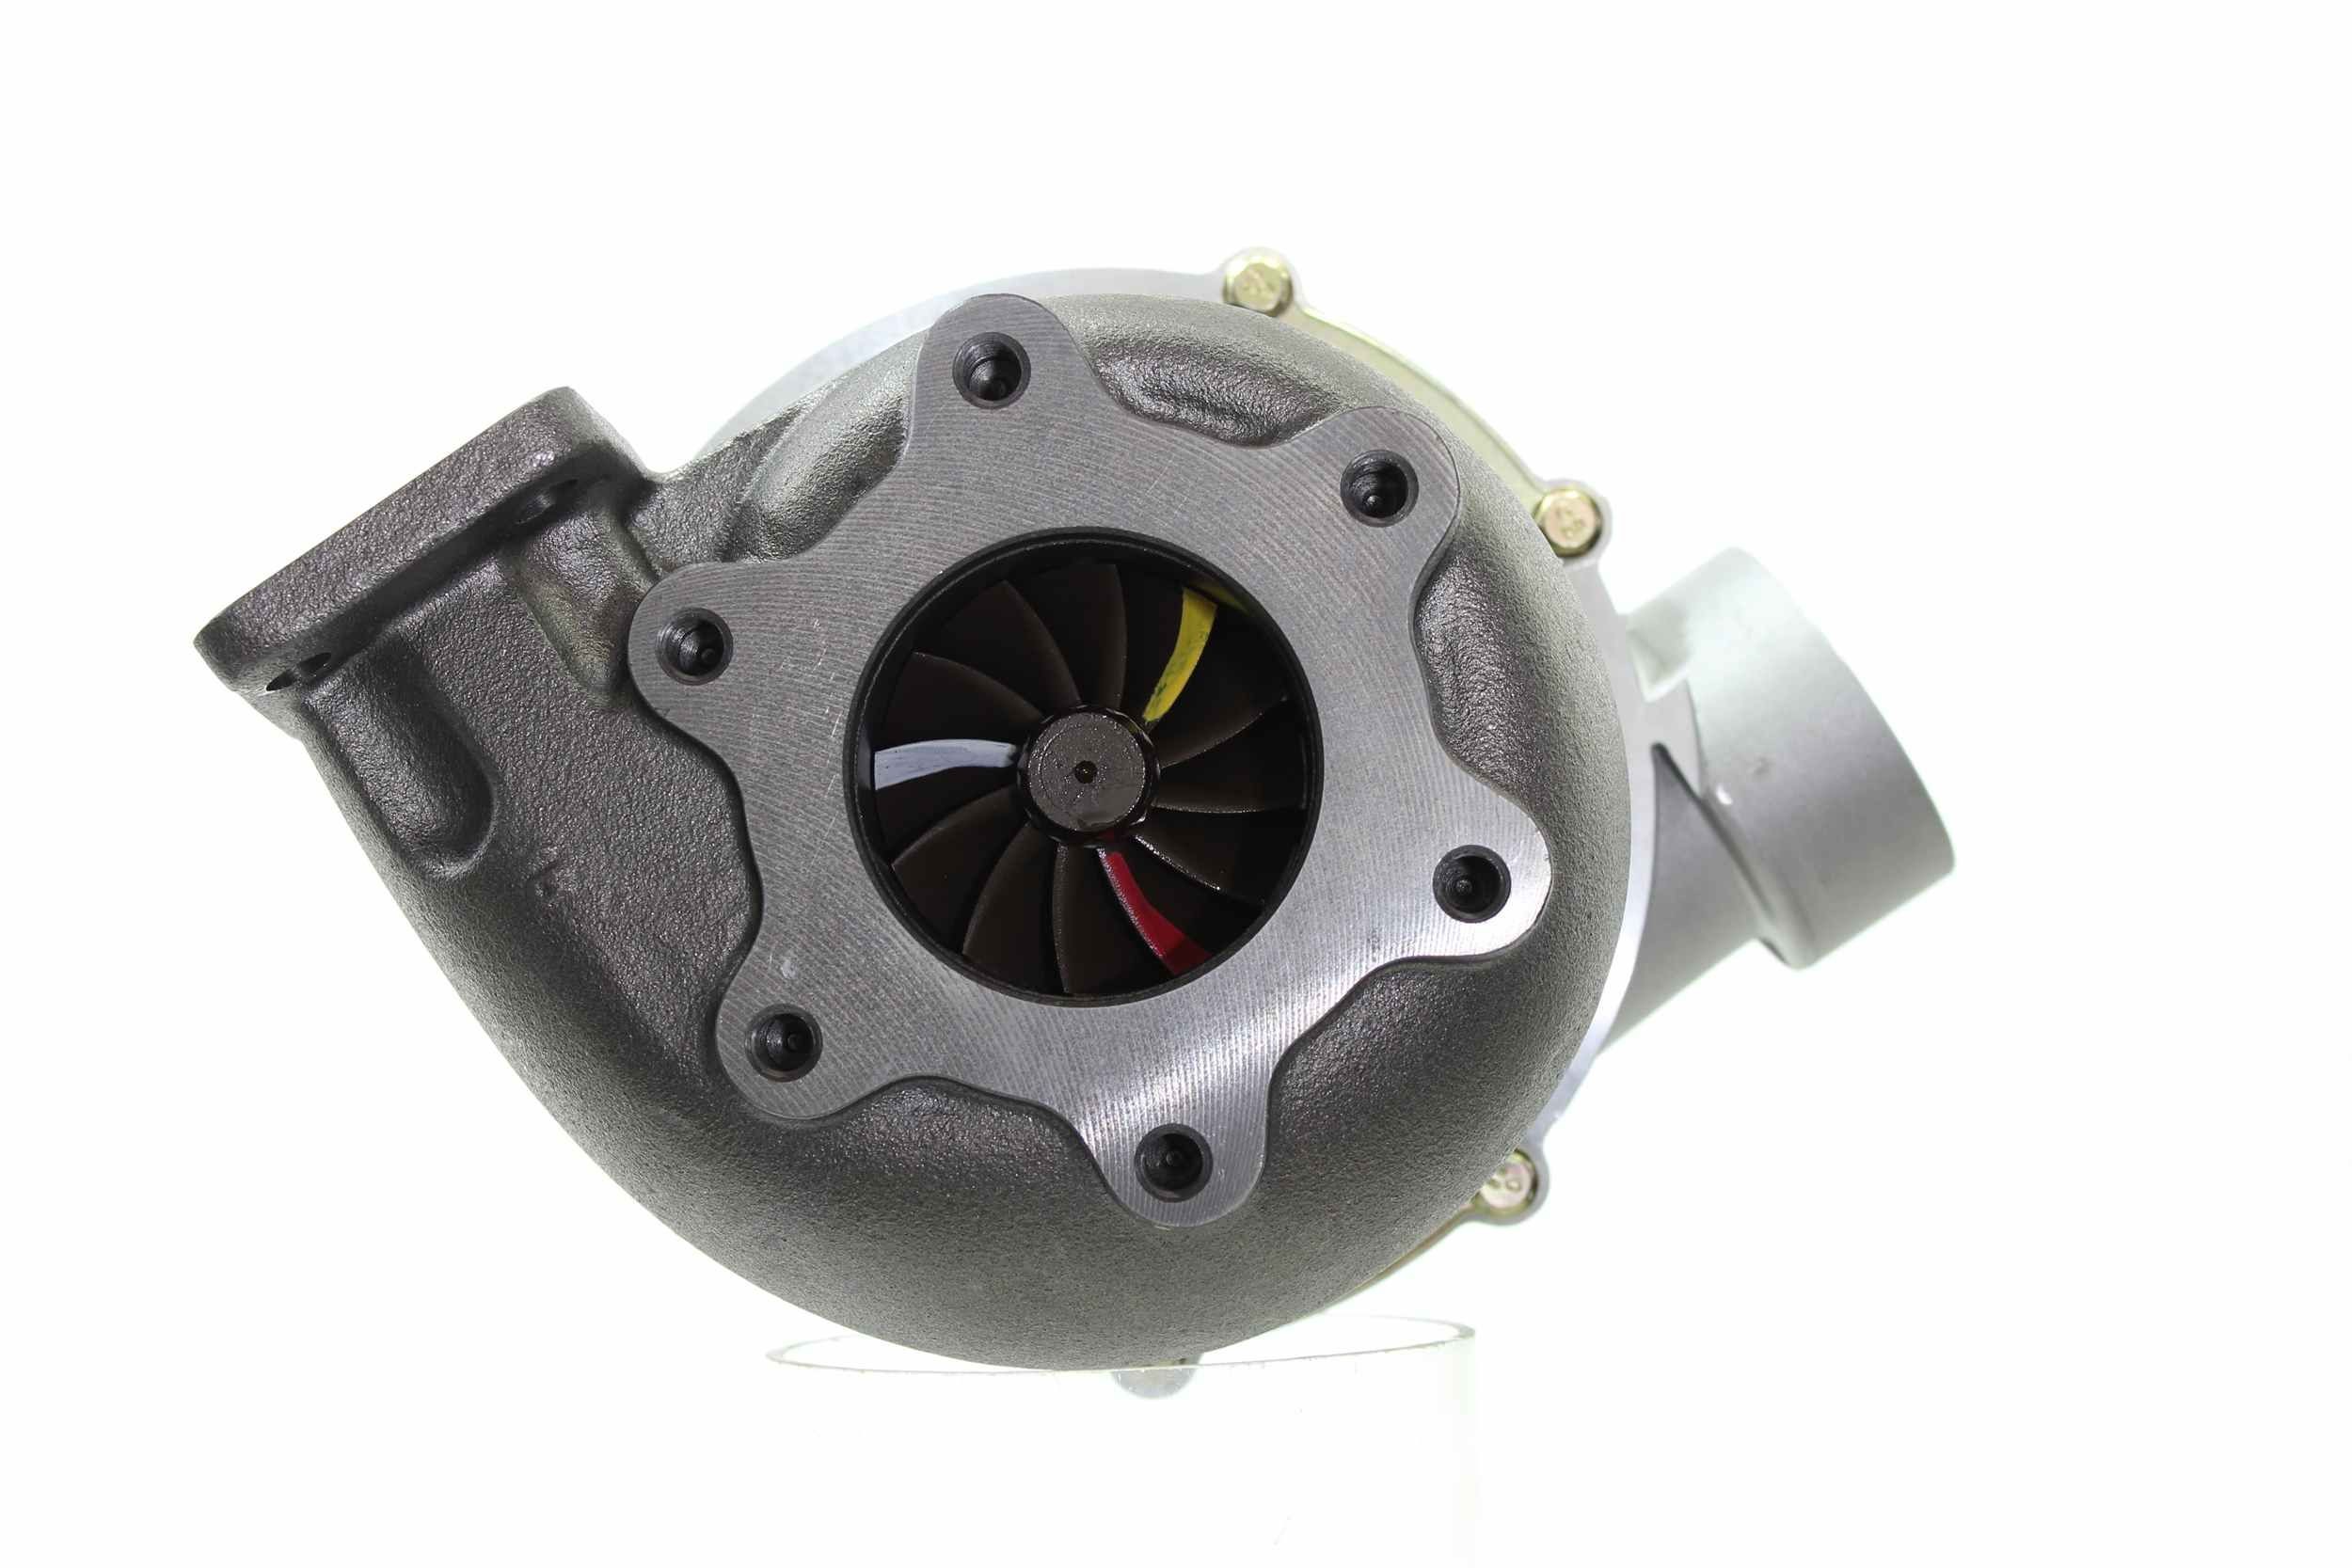 ALANKO 900472 Turbo Exhaust Turbocharger, Incl. Gasket Set, with attachment material